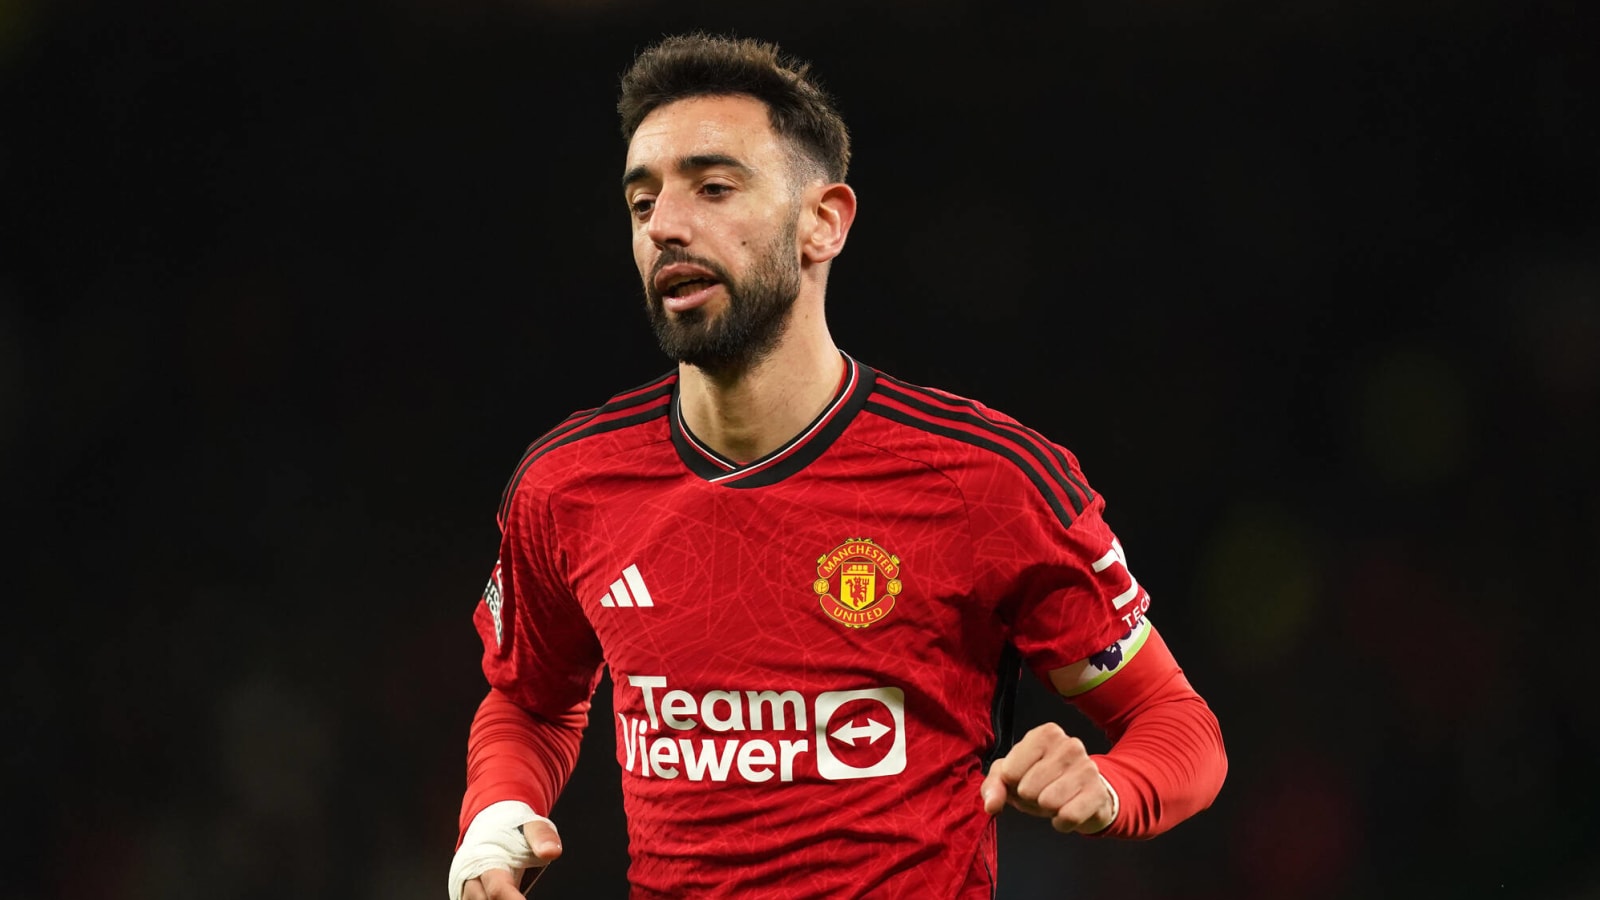 ‘The club needs to want me’: Bruno Fernandes breaks silence on exit rumours with honest admission